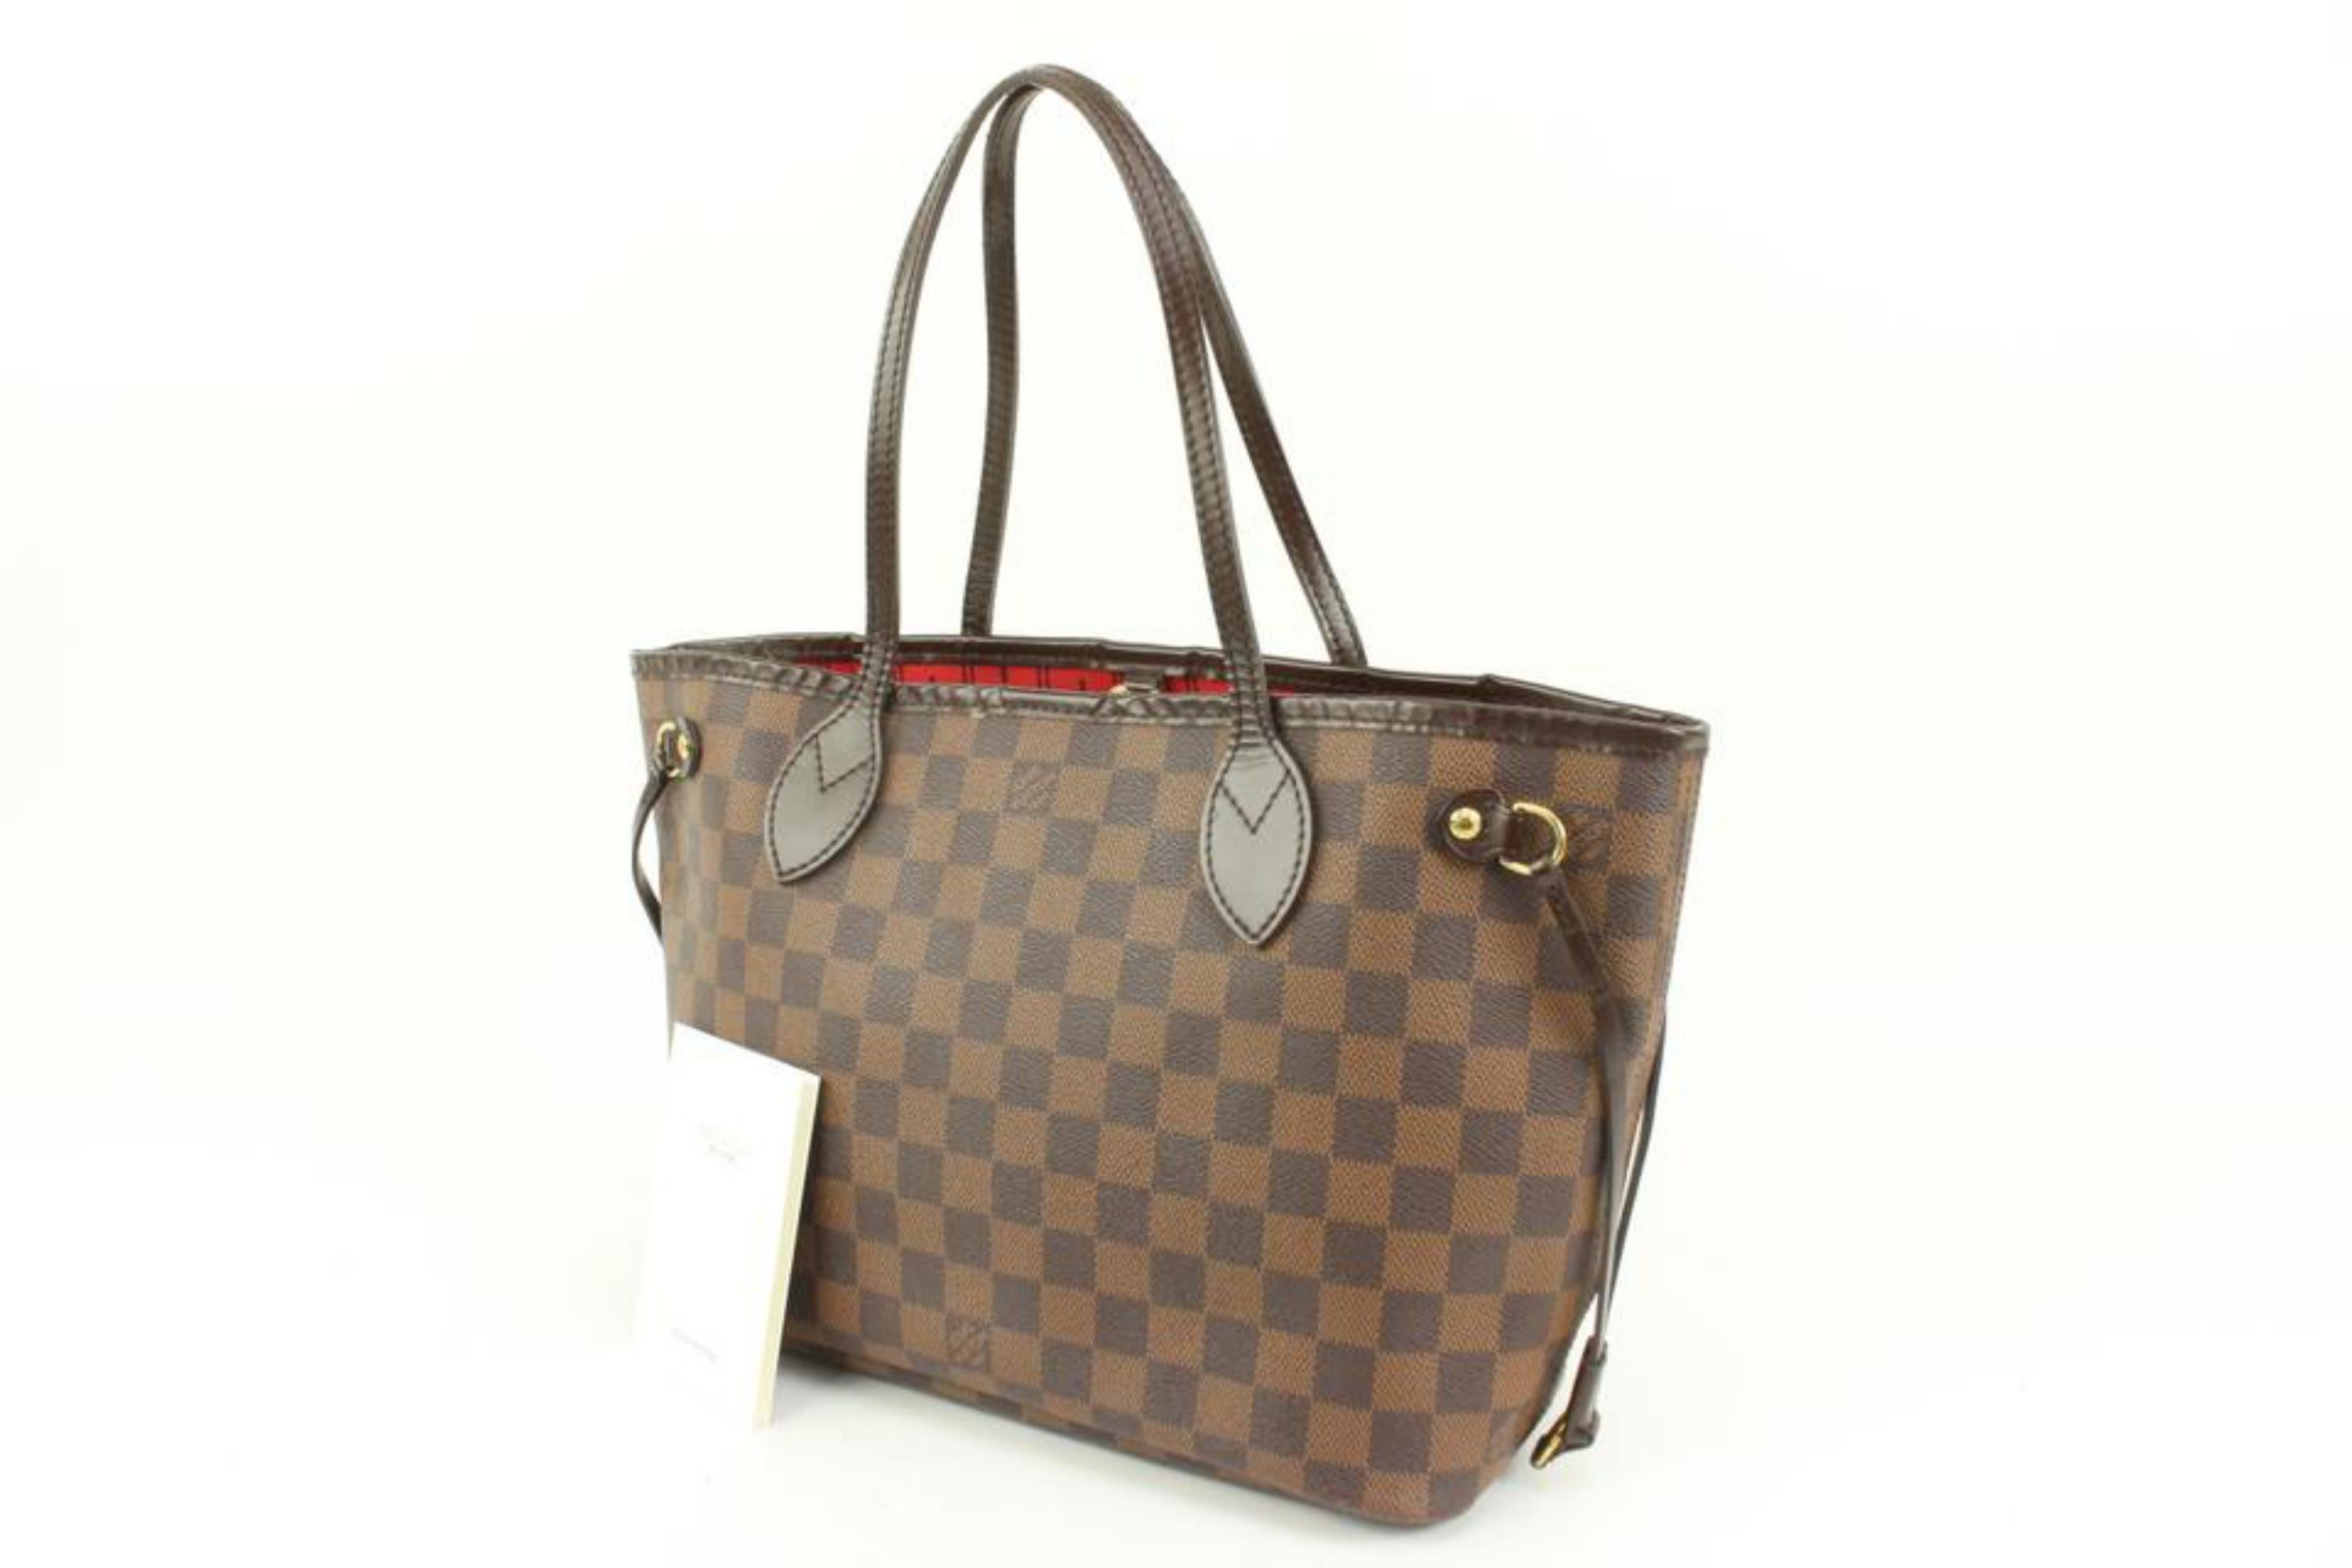 Louis Vuitton Small Damier Ebene Neverfull PM Tote Bag 94lz425s
Date Code/Serial Number: MB4038
Made In: France
Measurements: Length:  15